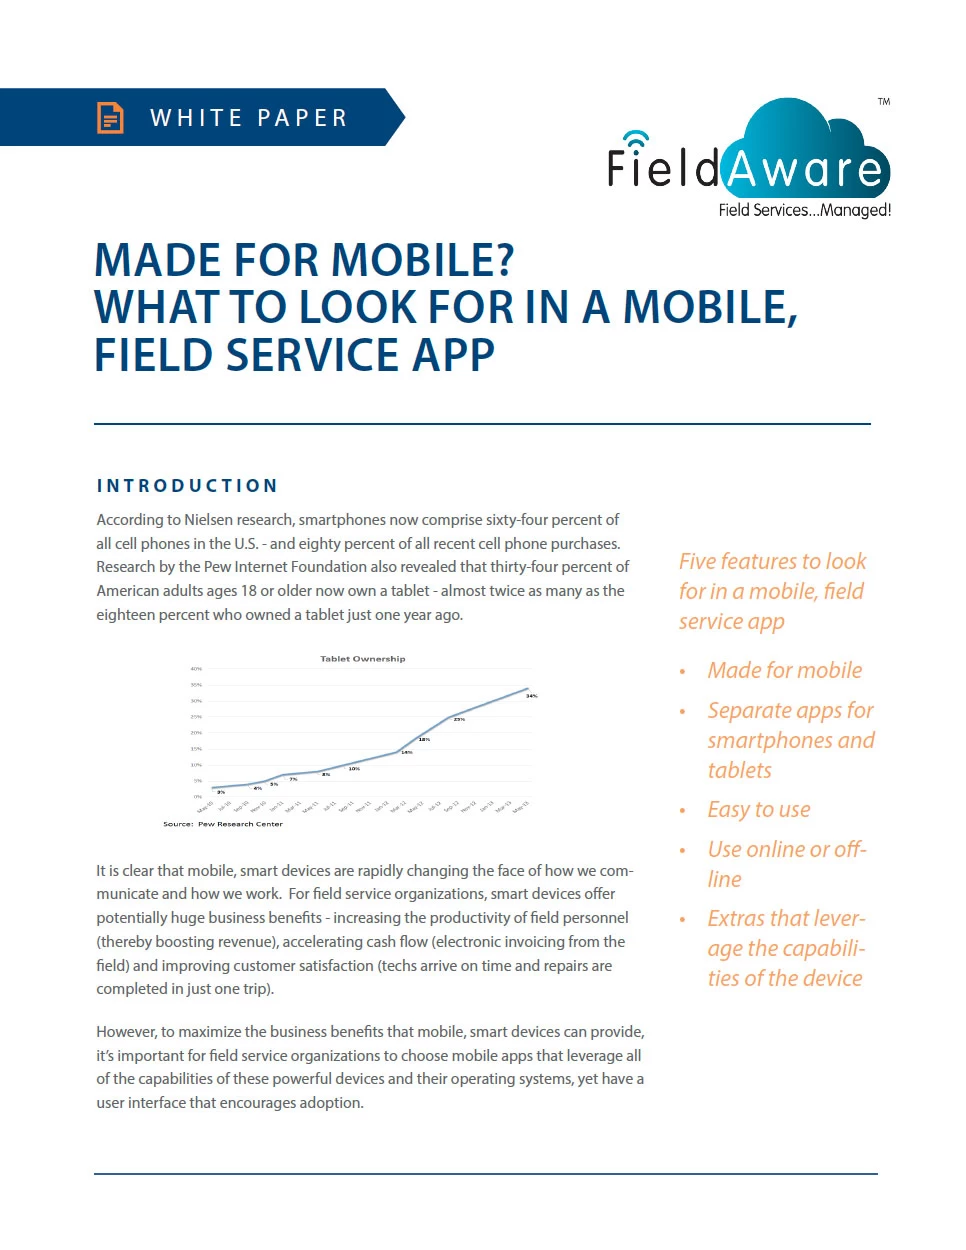 Made For Mobile? What To Look for In A Mobile Field Service App White Paper